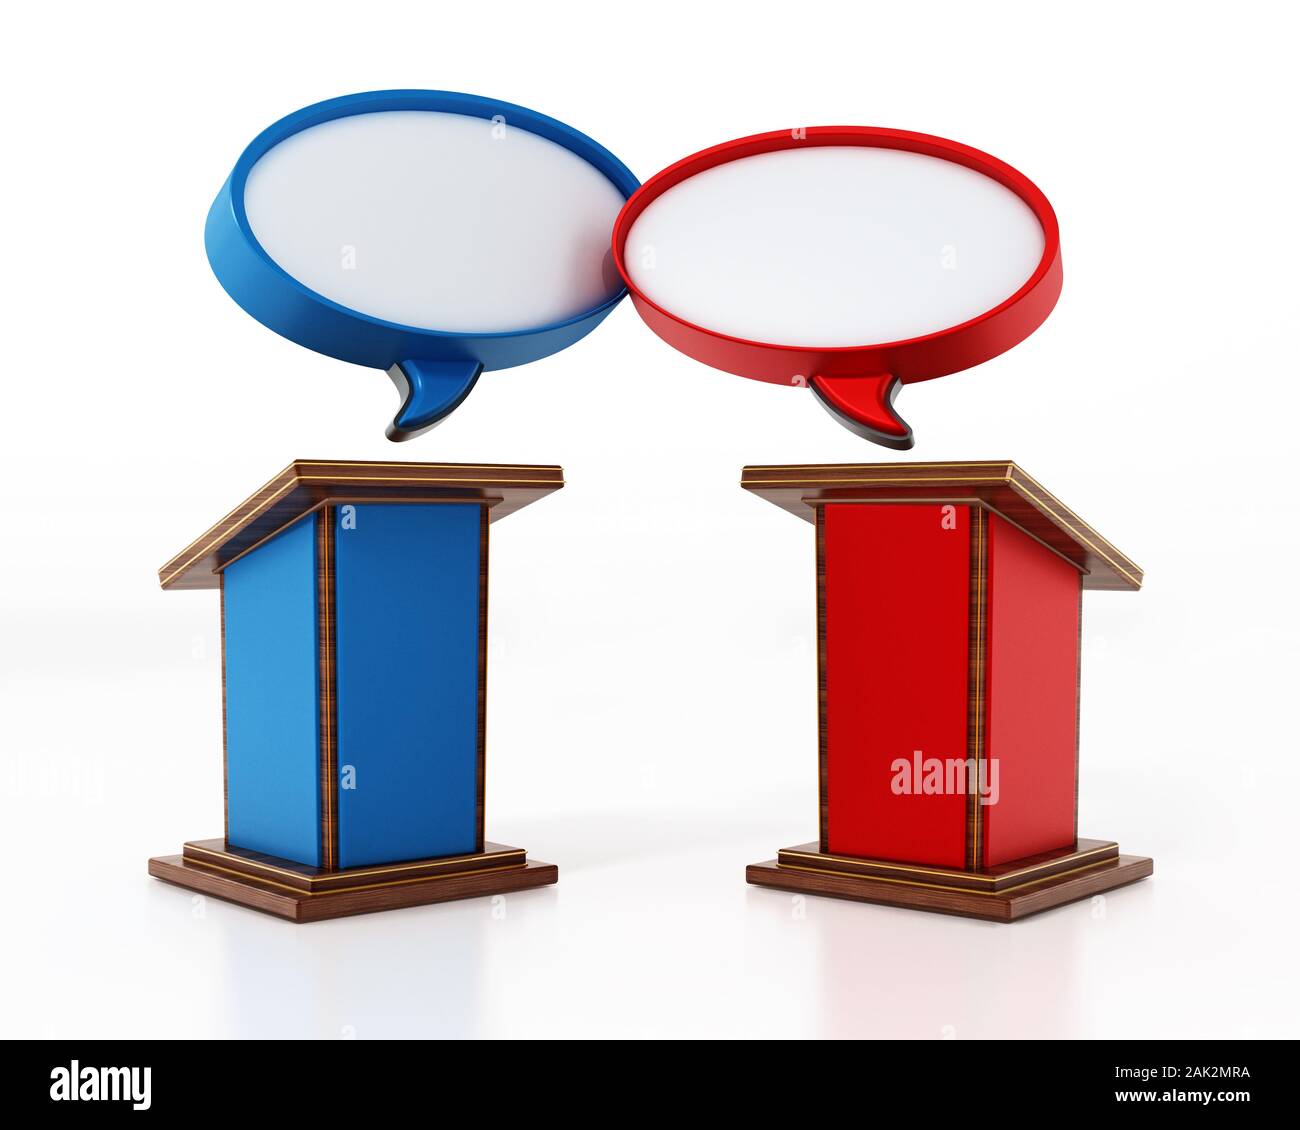 Blue and red lecterns with speech balloons. 3D illustration. Stock Photo